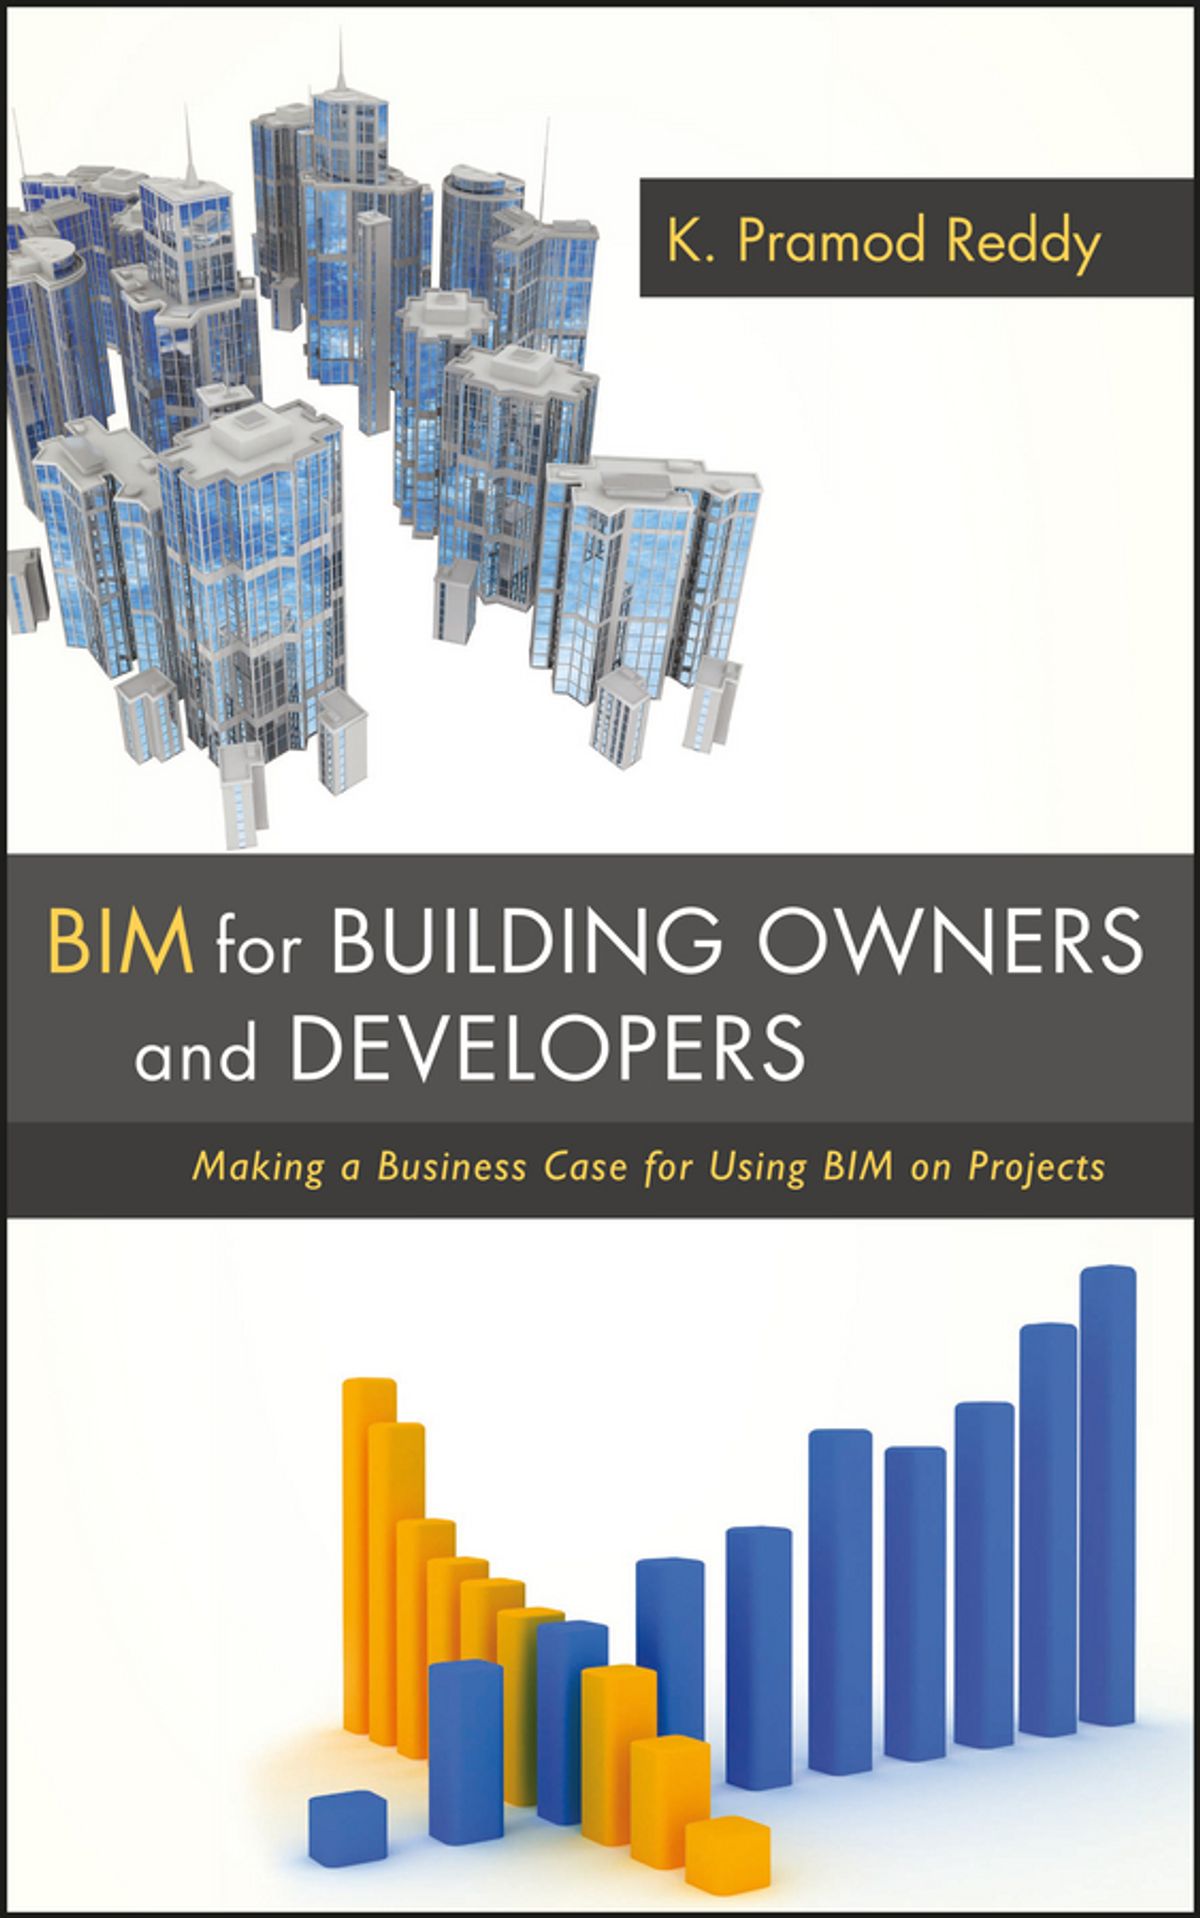 BIM for Building Owners and Developers by K. Pramod Reddy